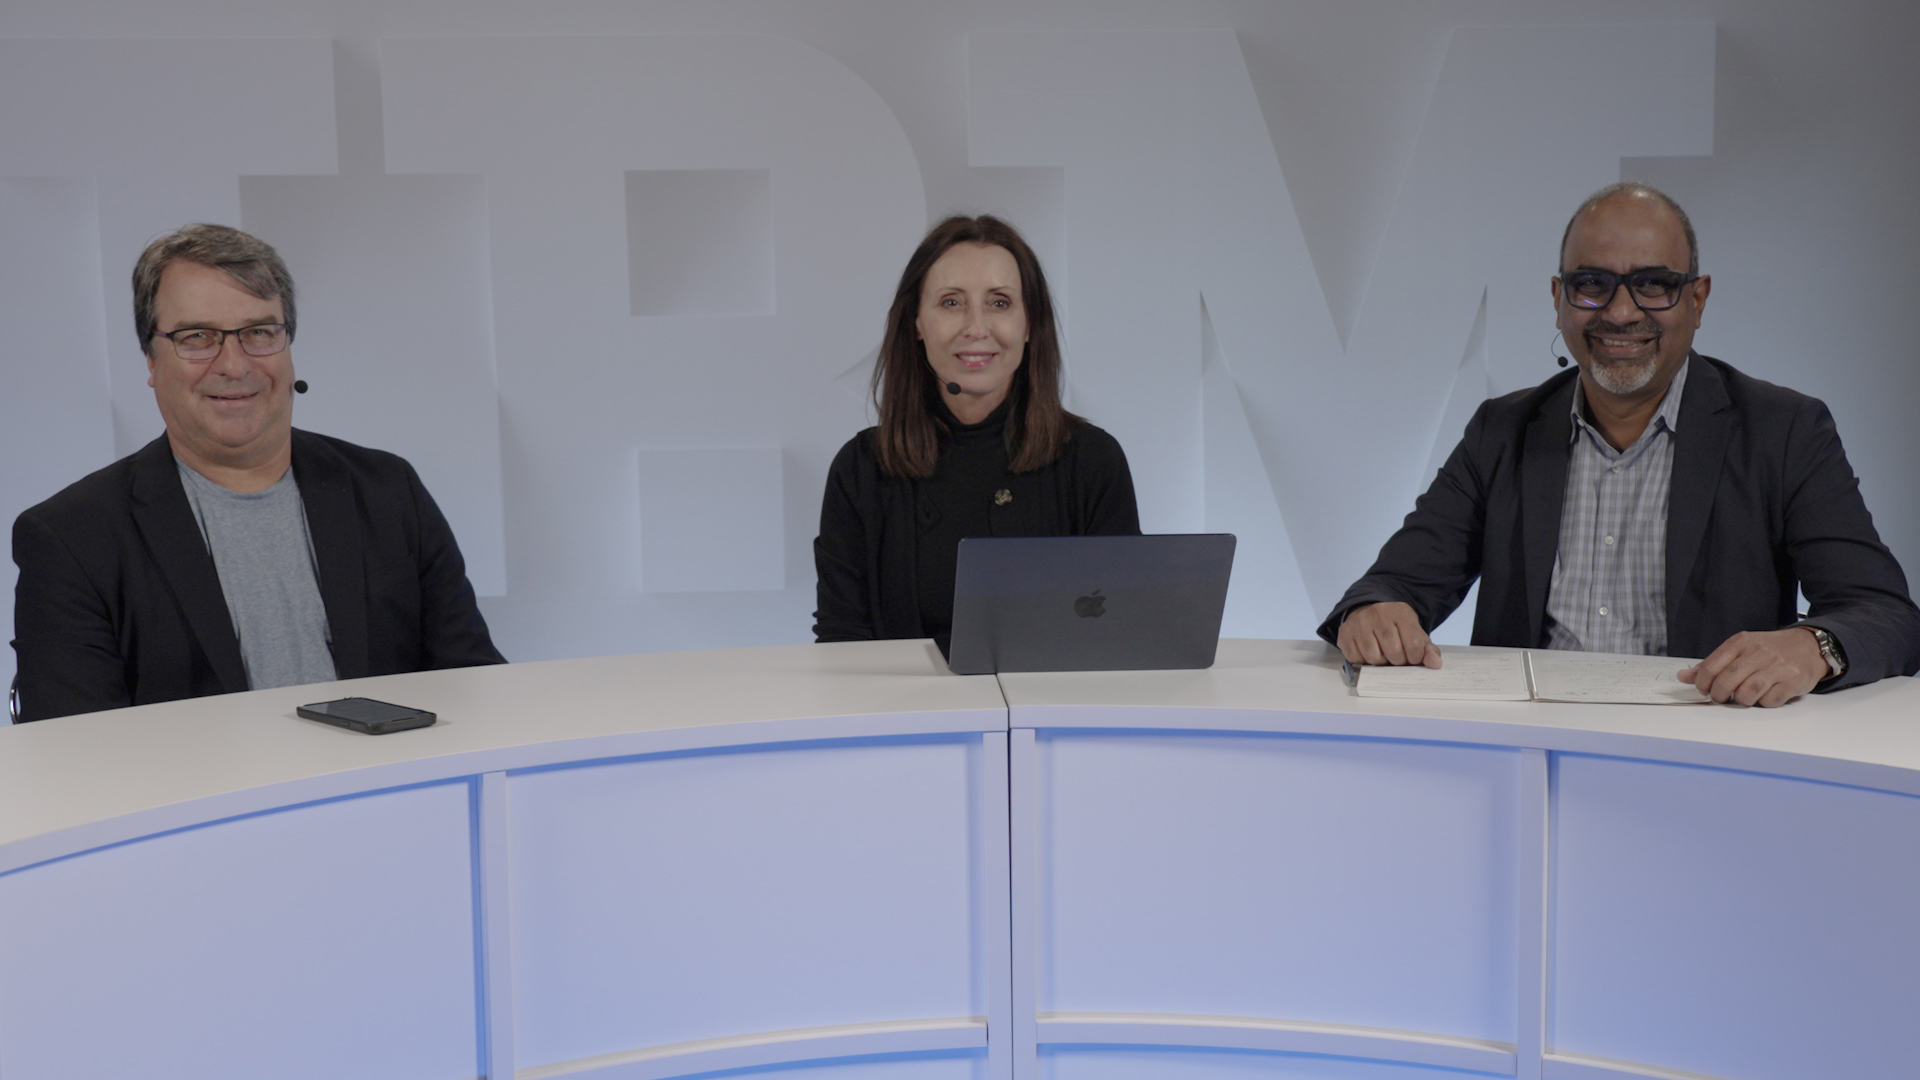 Analysts John Furrier, Shelly Kramer and Sarbjeet Johal discuss the AI space and insights on IBM's AI strategy from the keynote at IBM Think 2024.